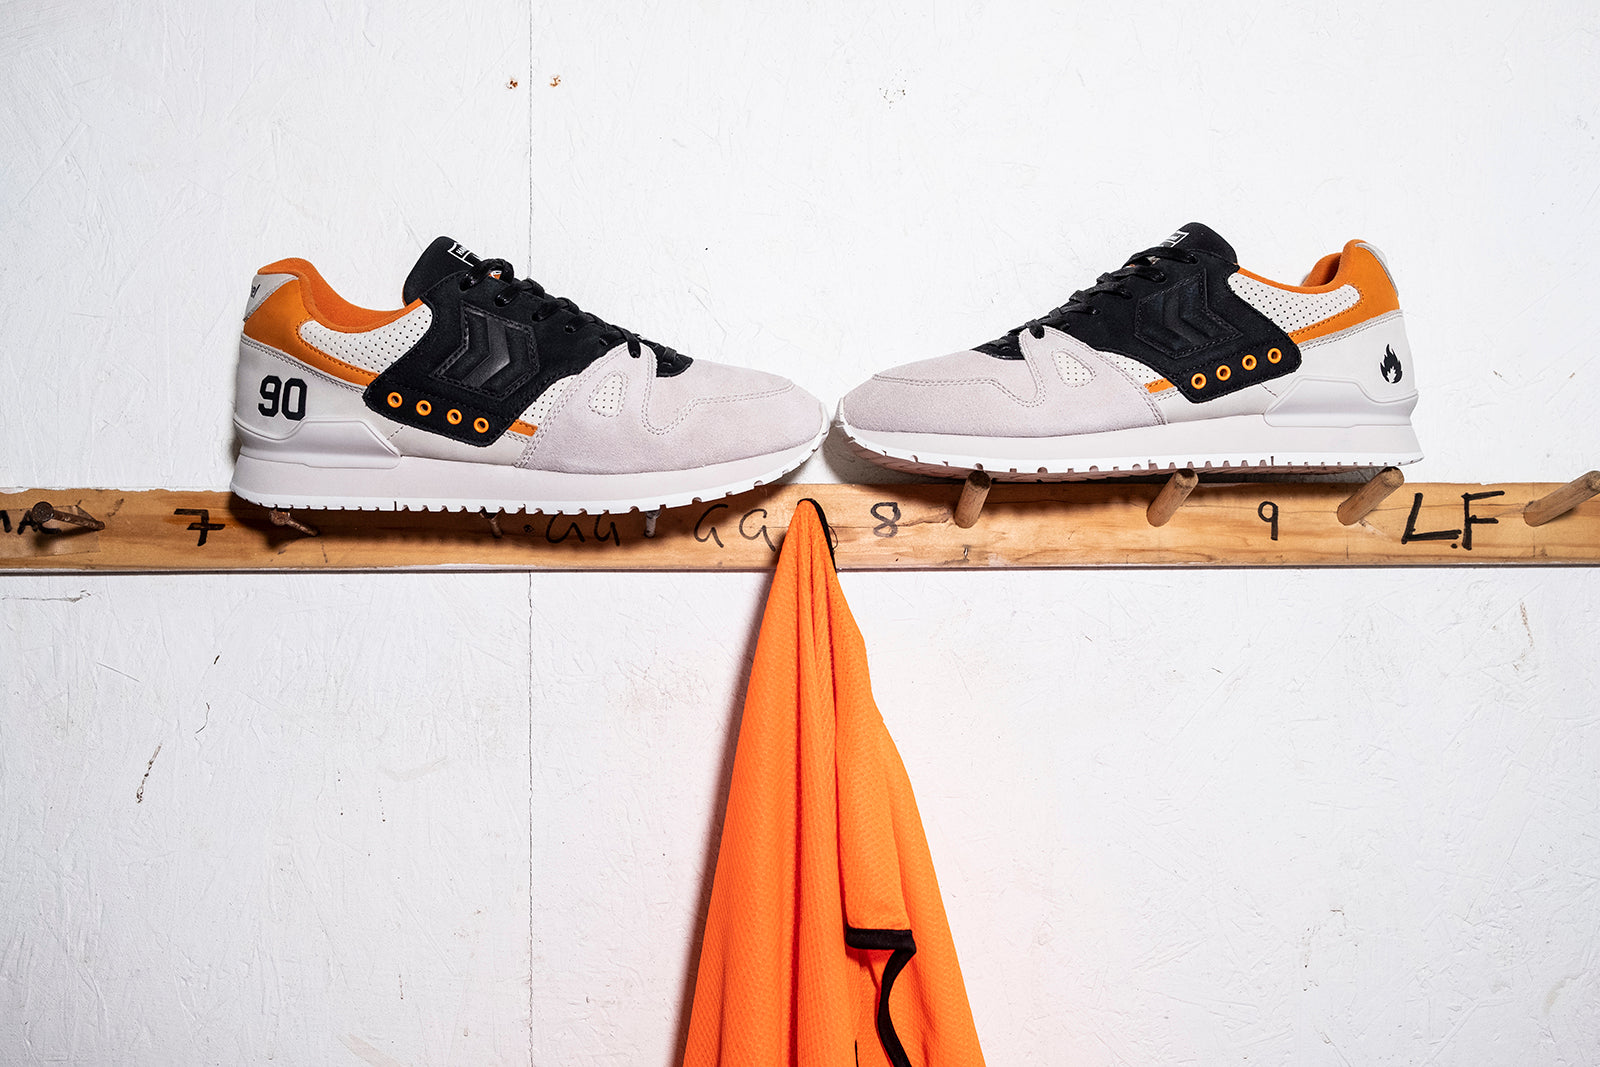 HANON "Standing Only" Football Pack